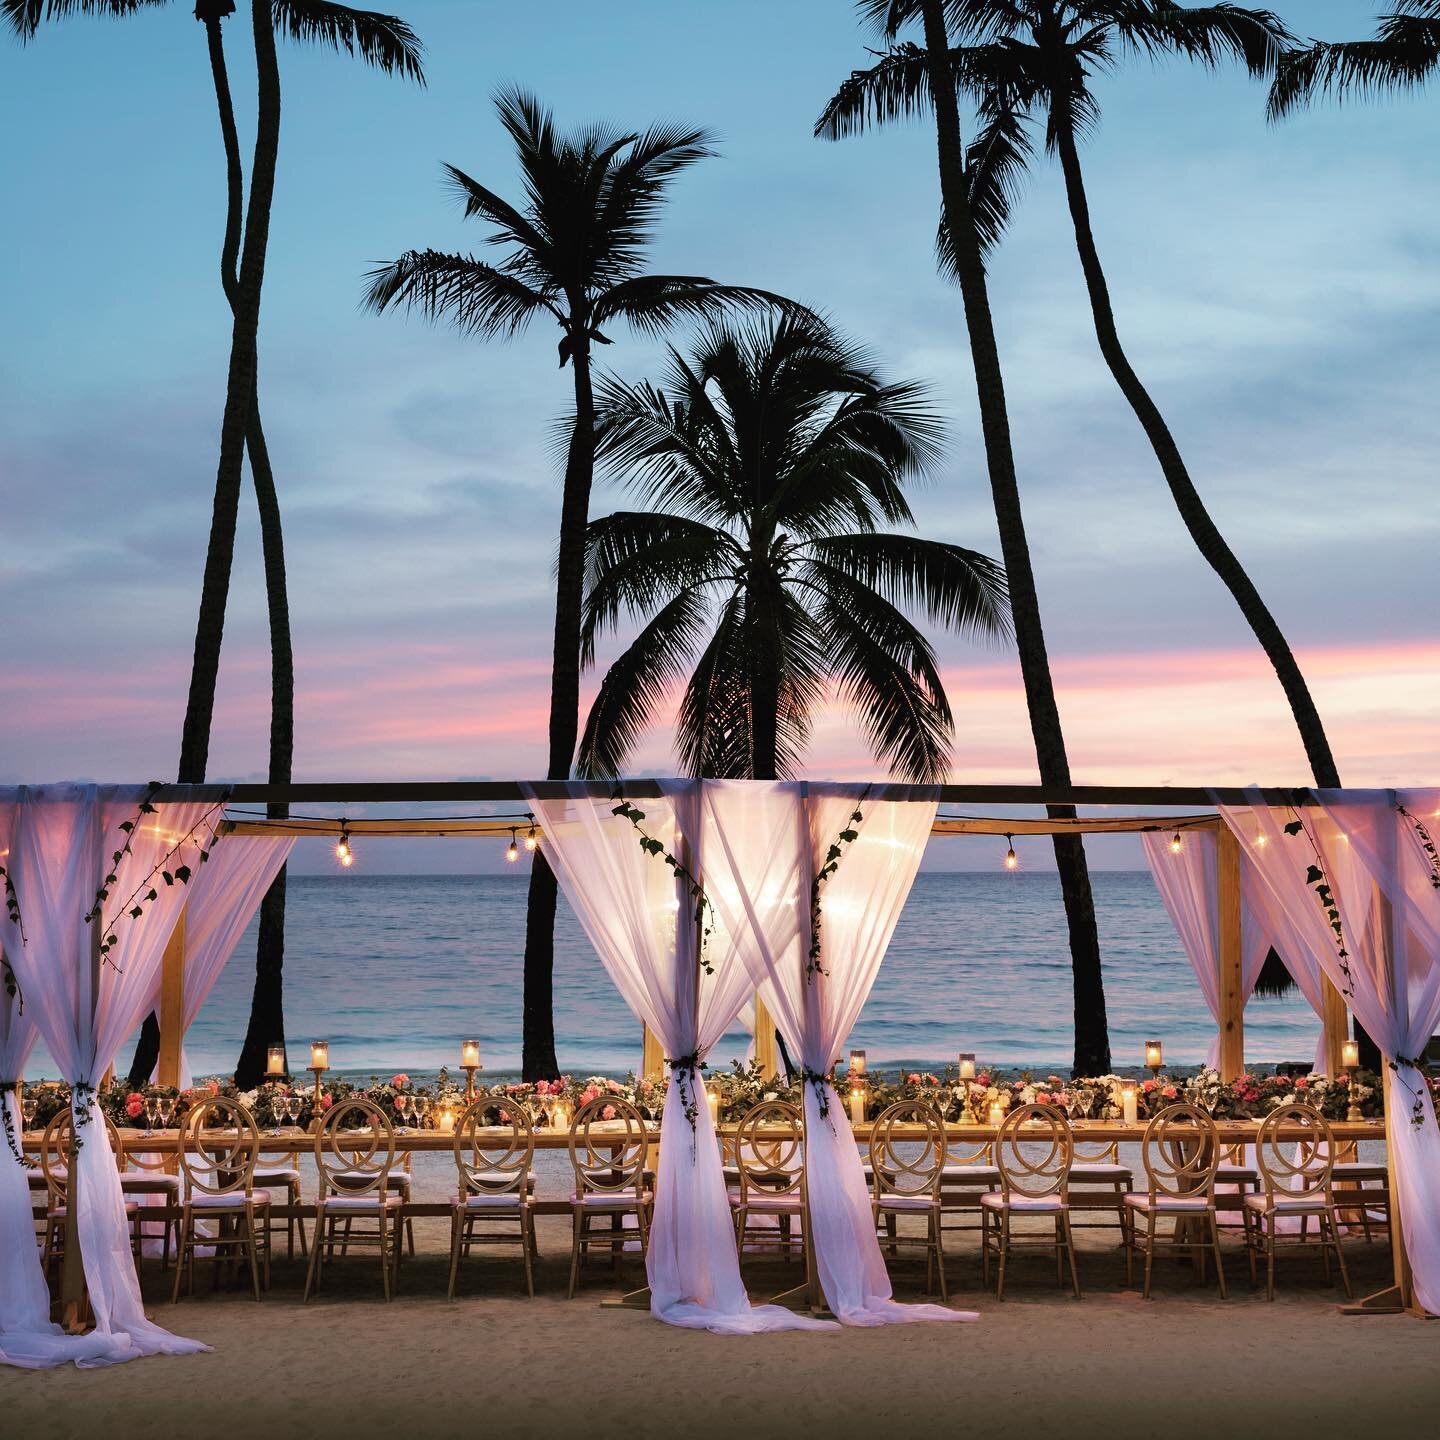 This private sunset reception with close friends and family is what destination weddings are all about. Located at Hilton La Romana on the Southeast coast of the Dominican Republic, this location is sure to impress!
.
.
.
.
.
.
.
.
#destinationweddin